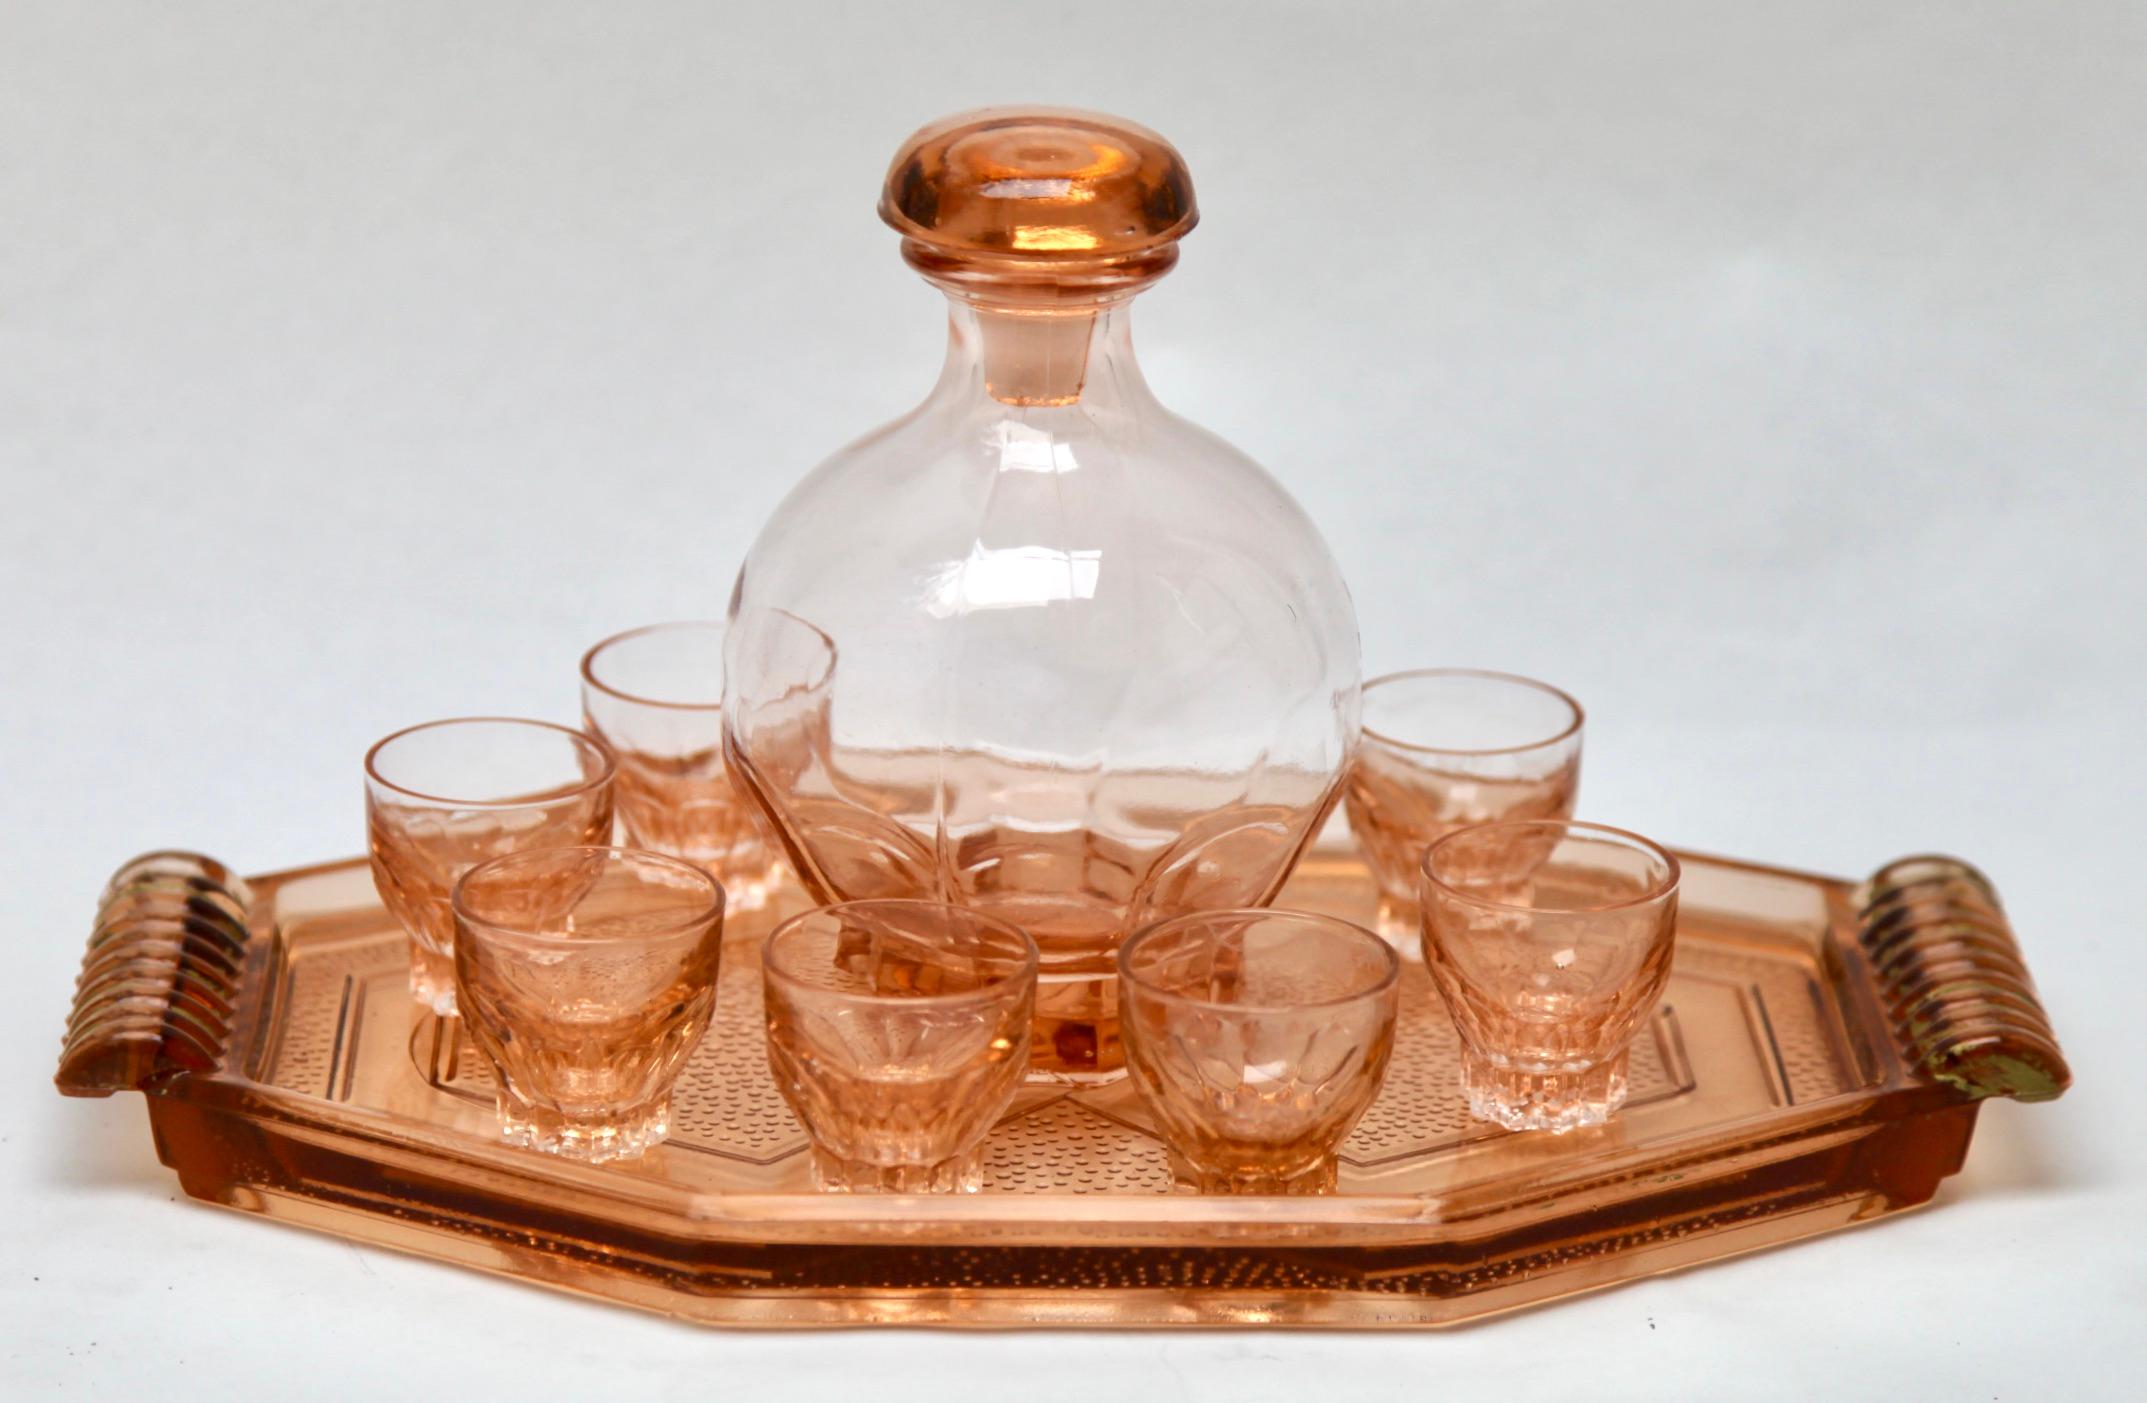 Glass factory de Rupel, boom, Belgium.

Set with a decanter and 7 matching glasses and a serving tray.

Dimensions: decanter
Height 15 cm 5.9 inch
Width 10 cm 3.93 inch.

Dimensions: liqueur glass
Height 4 cm 1.57 inch
Width 4 cm 1.57